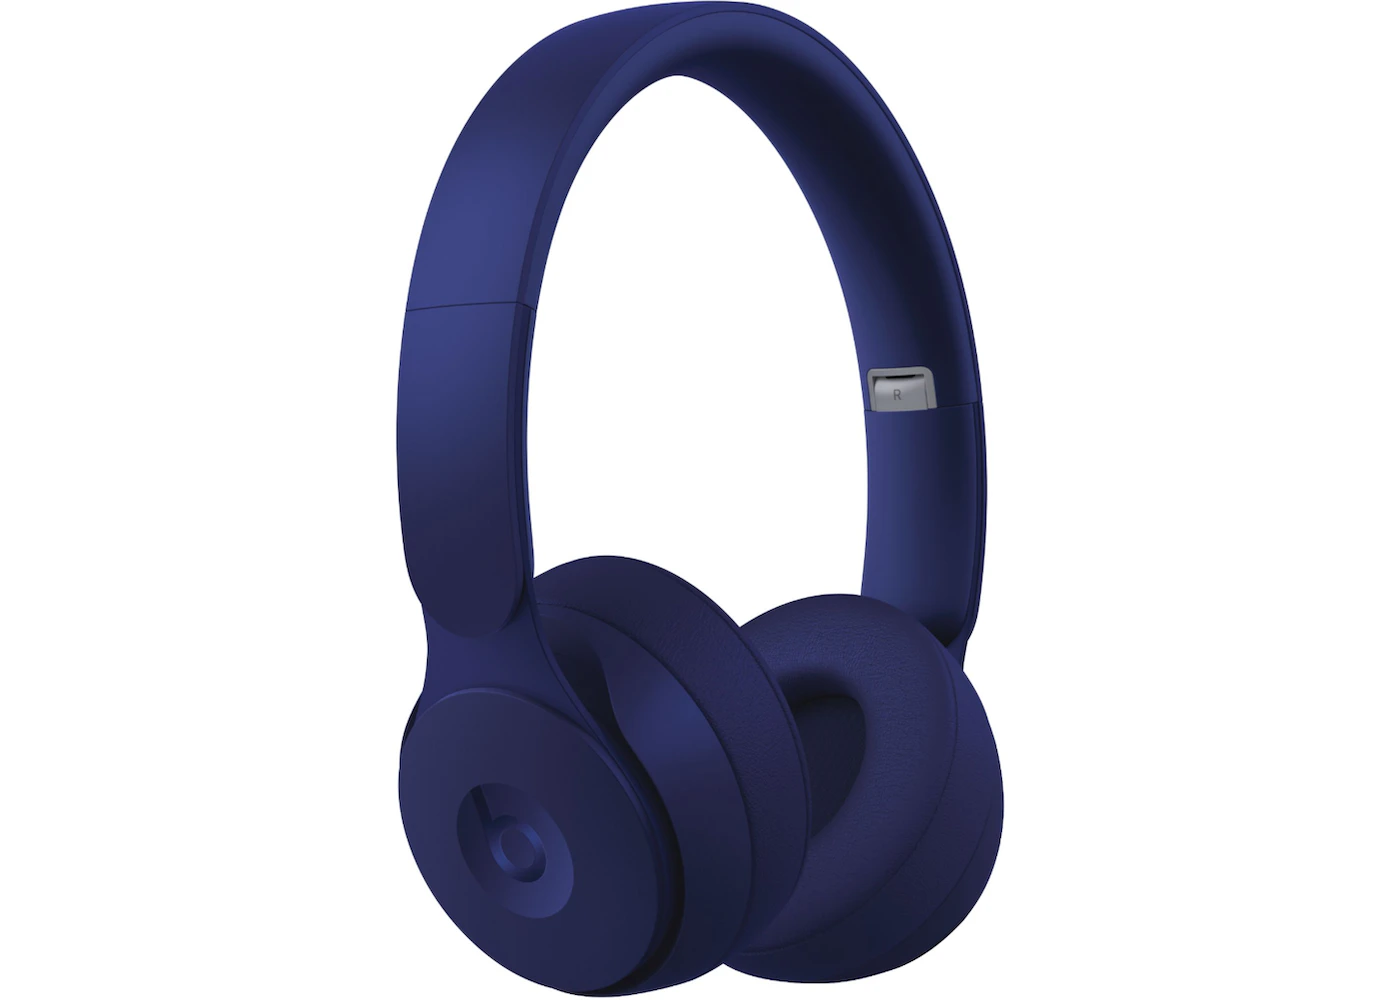 Beats by Dr. Dre Solo Wireless Noise Cancelling Headphones Pro More Matte  Collection MRJA2LL/A Dark Blue - US